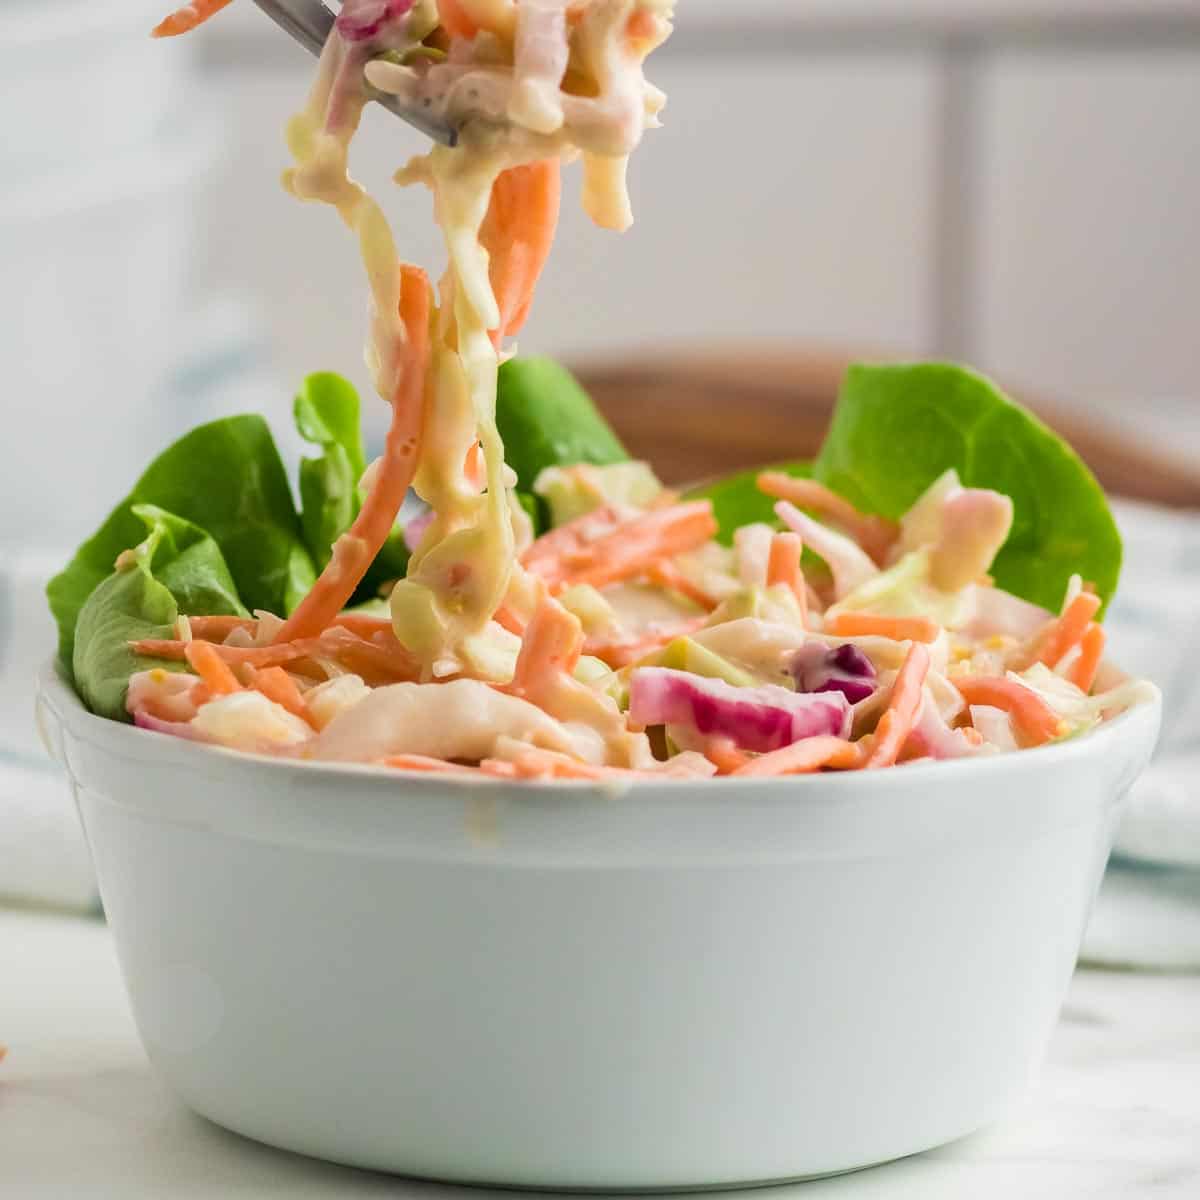 a forkful of freshly made creamy coleslaw in a white bowl